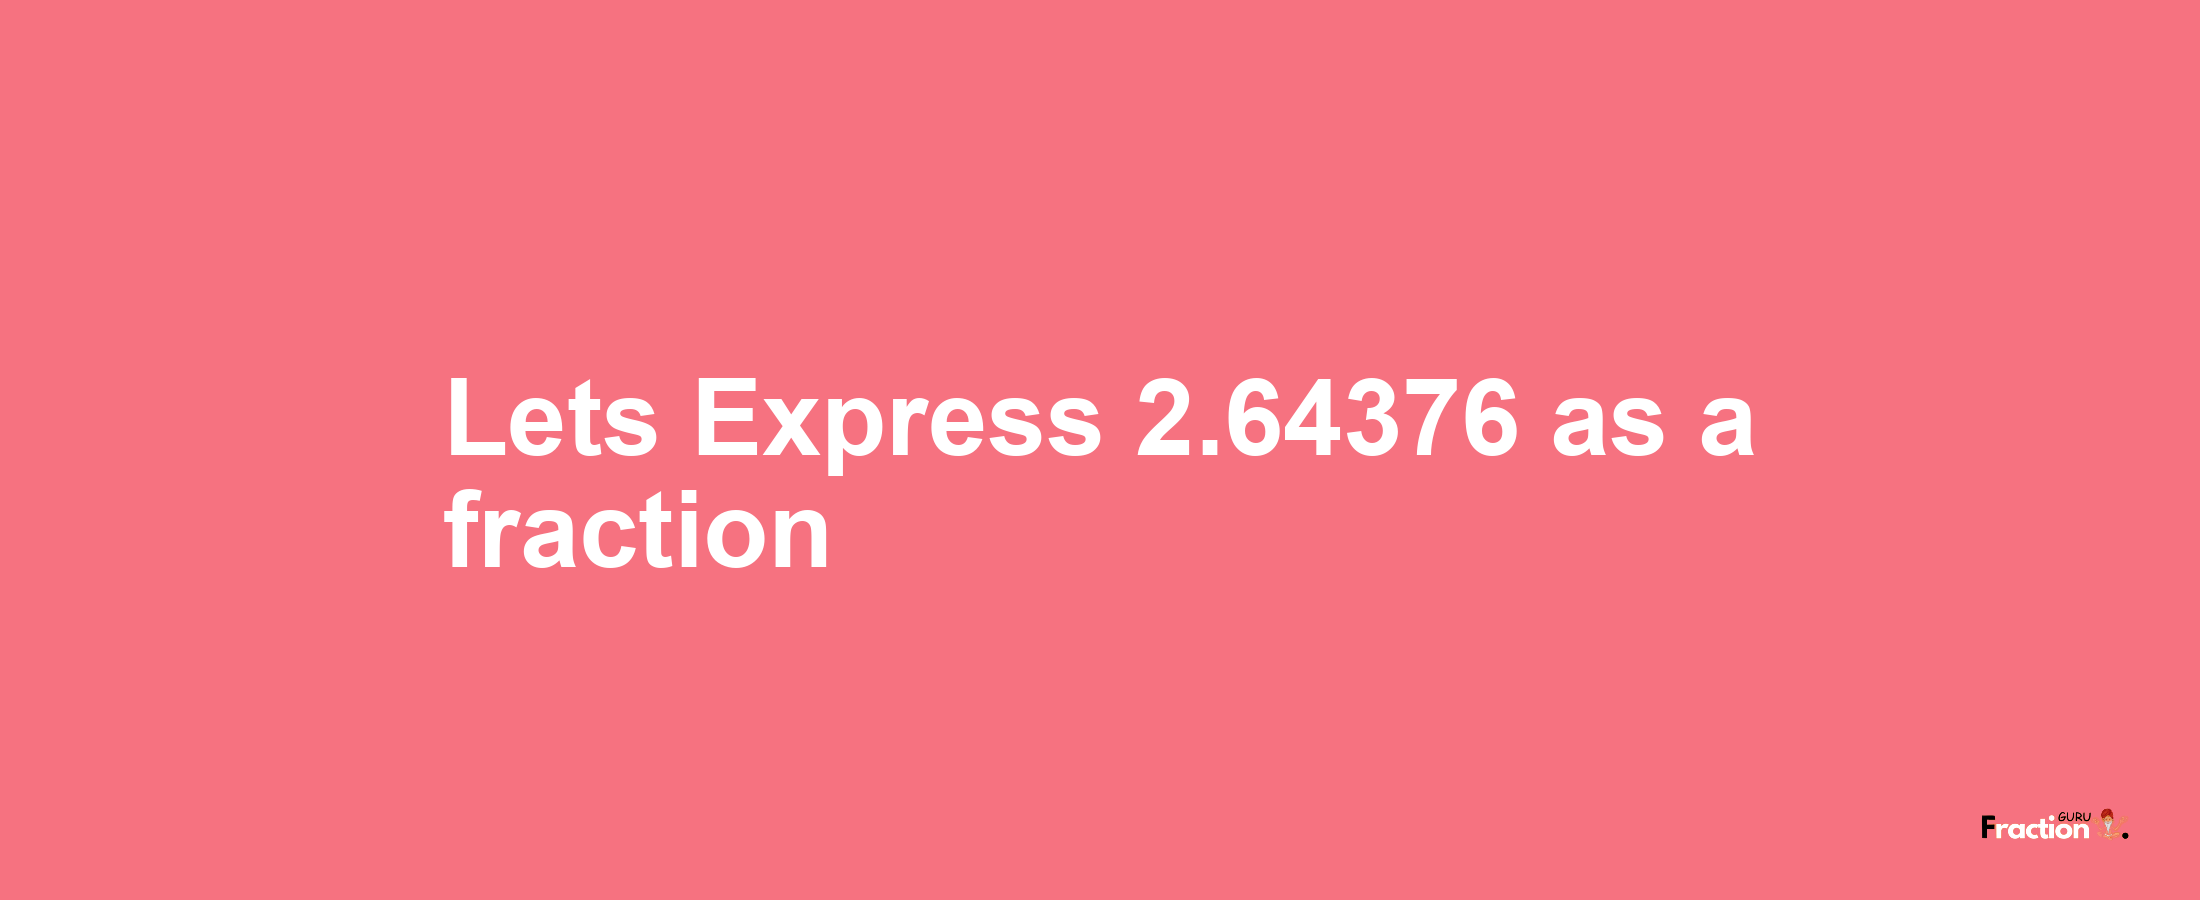 Lets Express 2.64376 as afraction